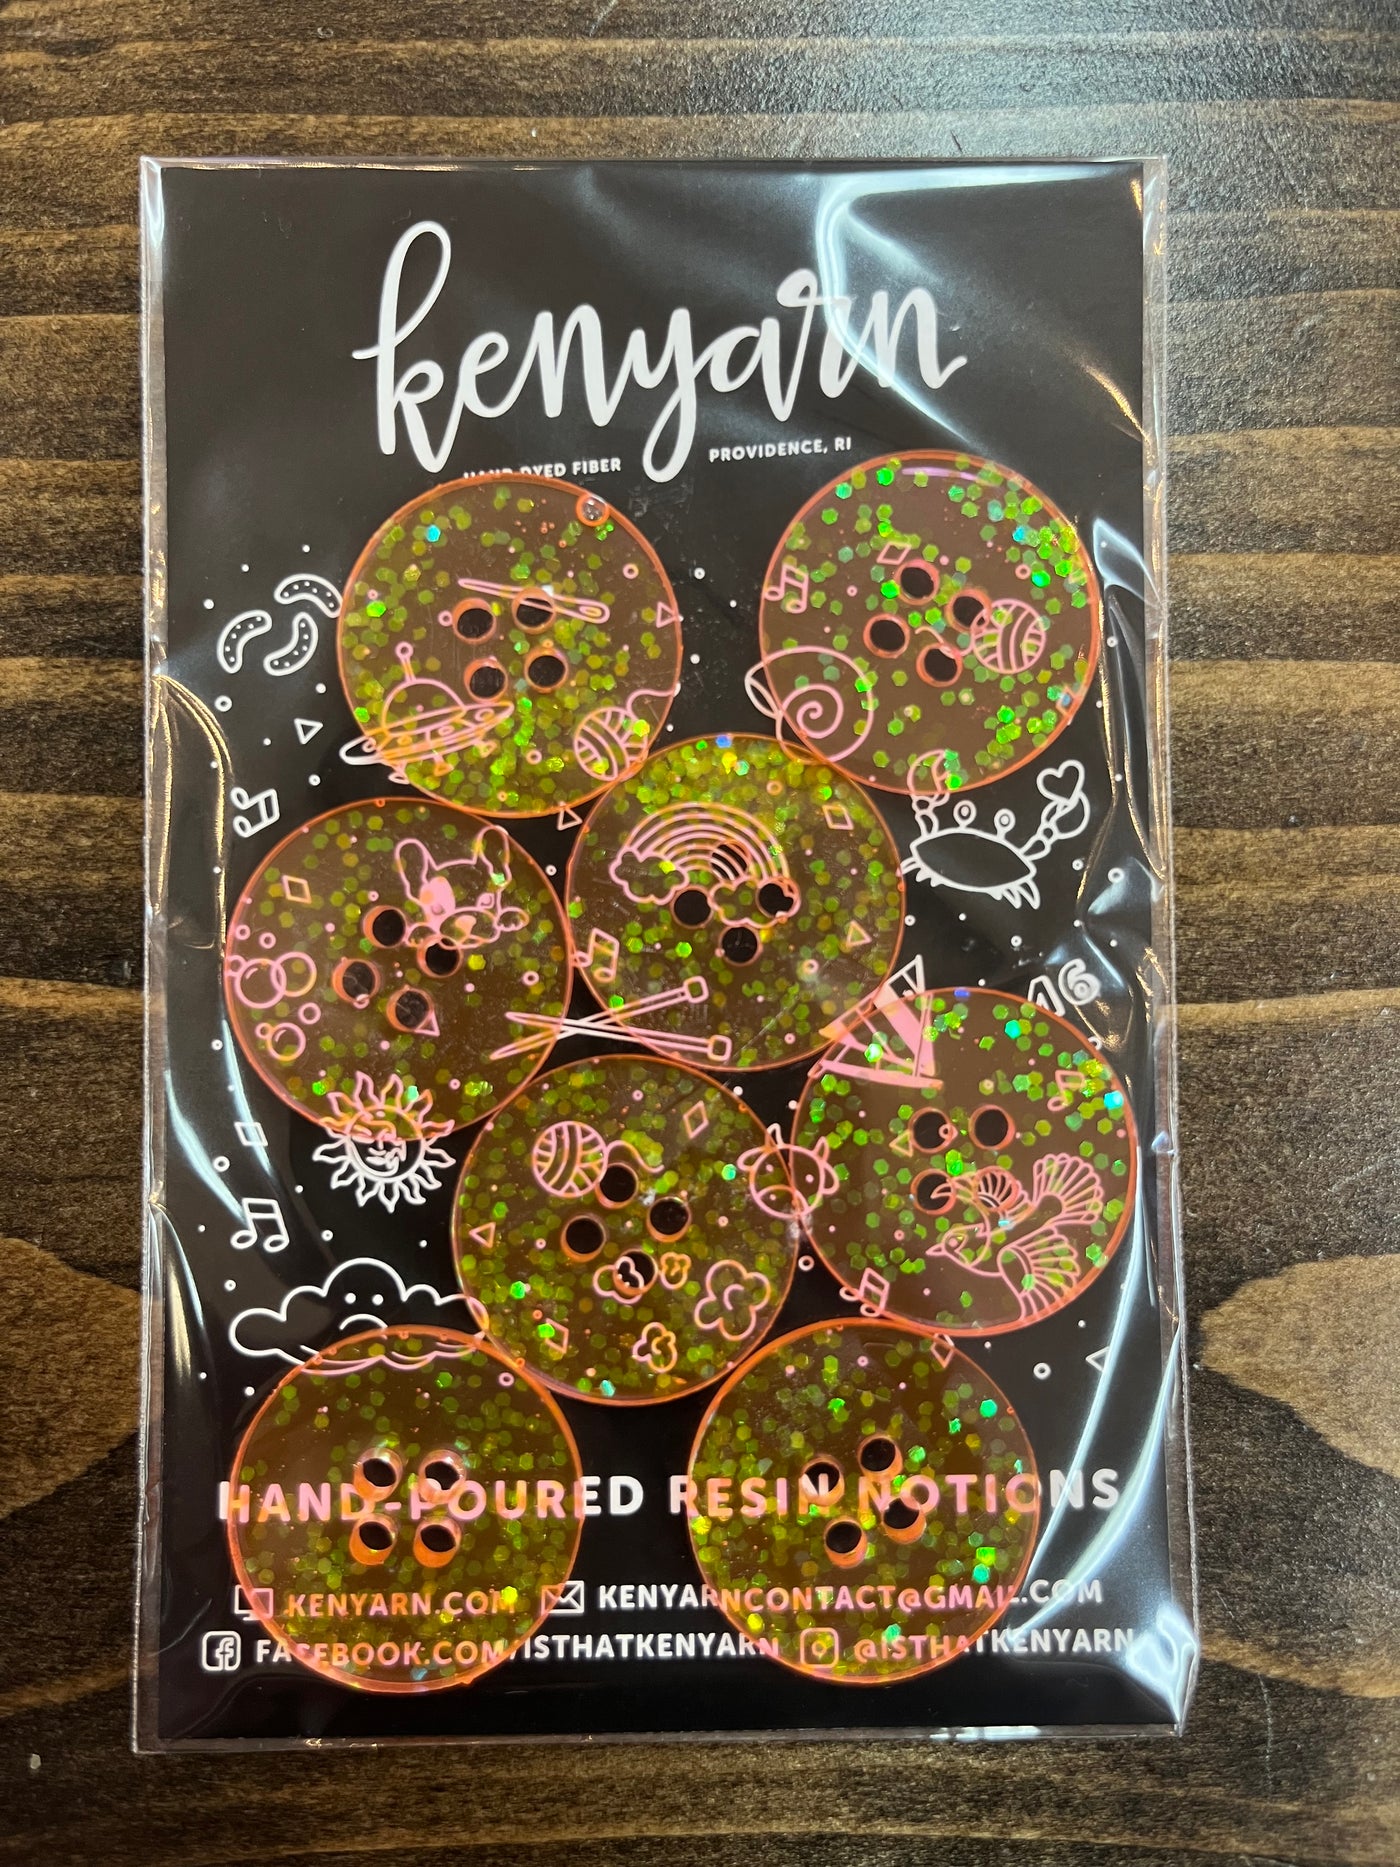 A 1-inch circle resin button in translucent peach color with green sparkles inside. The packaging reads "Kenyarn."